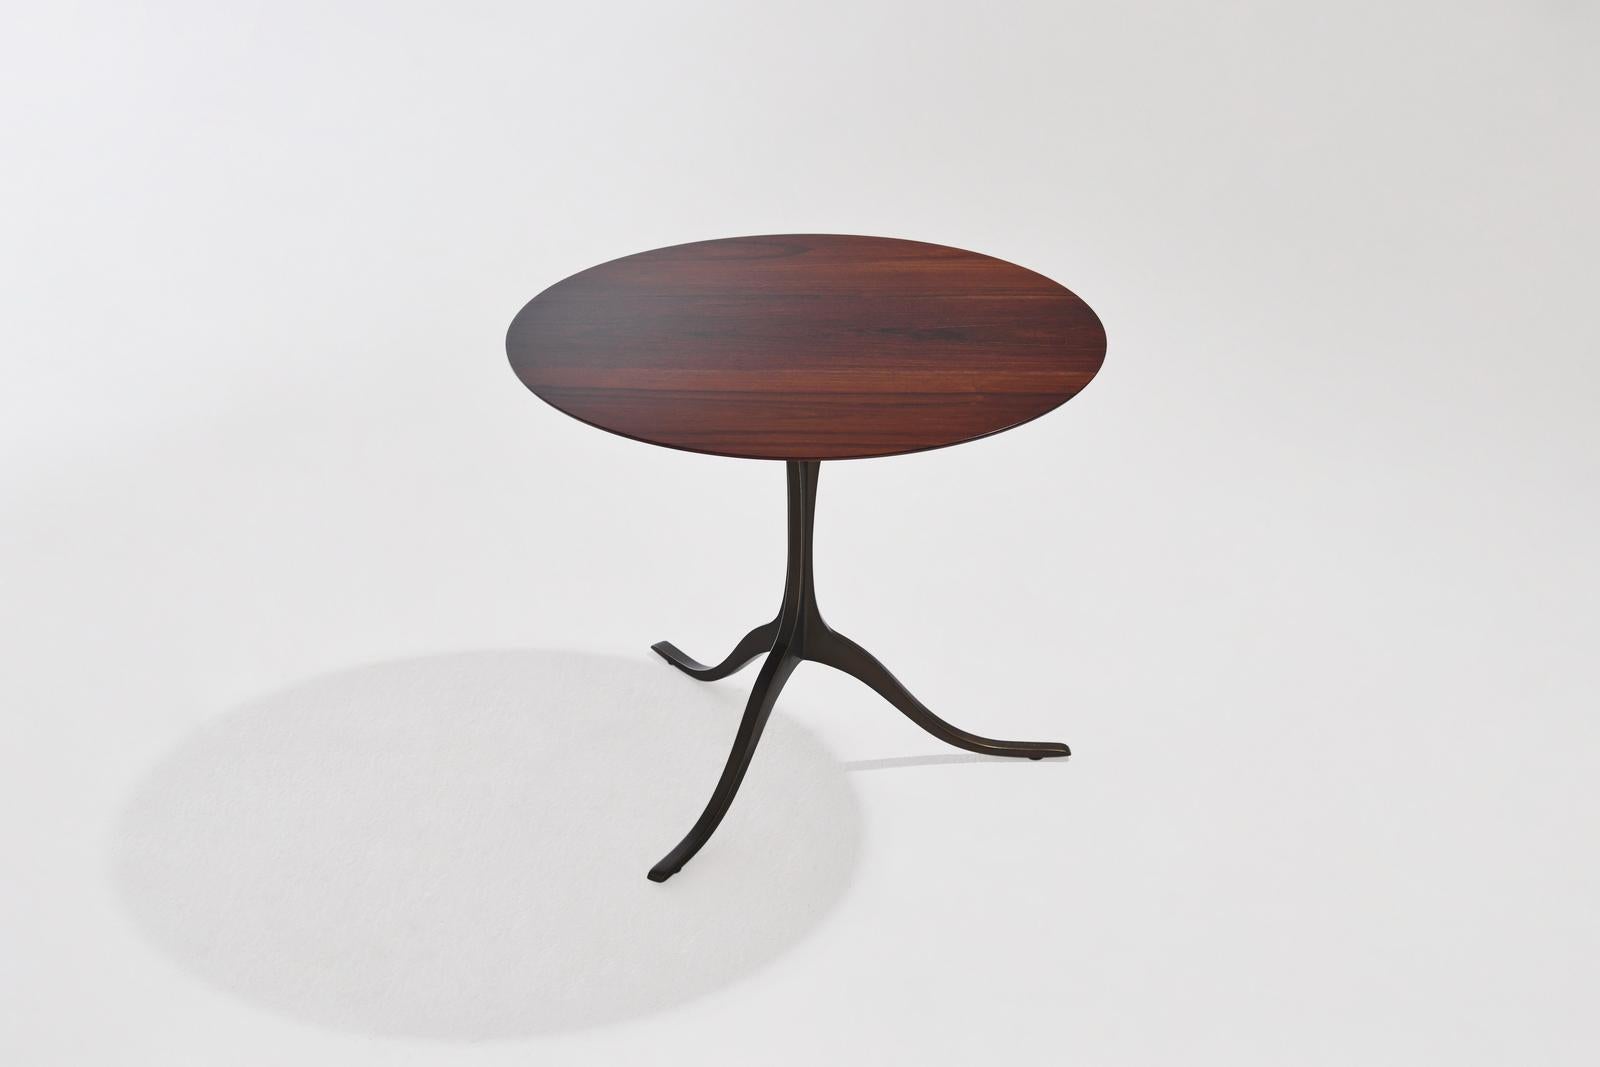 This latest round table comes in two sizes heights, with the wooden top of your choice. This table is H 52 cm H 20.47